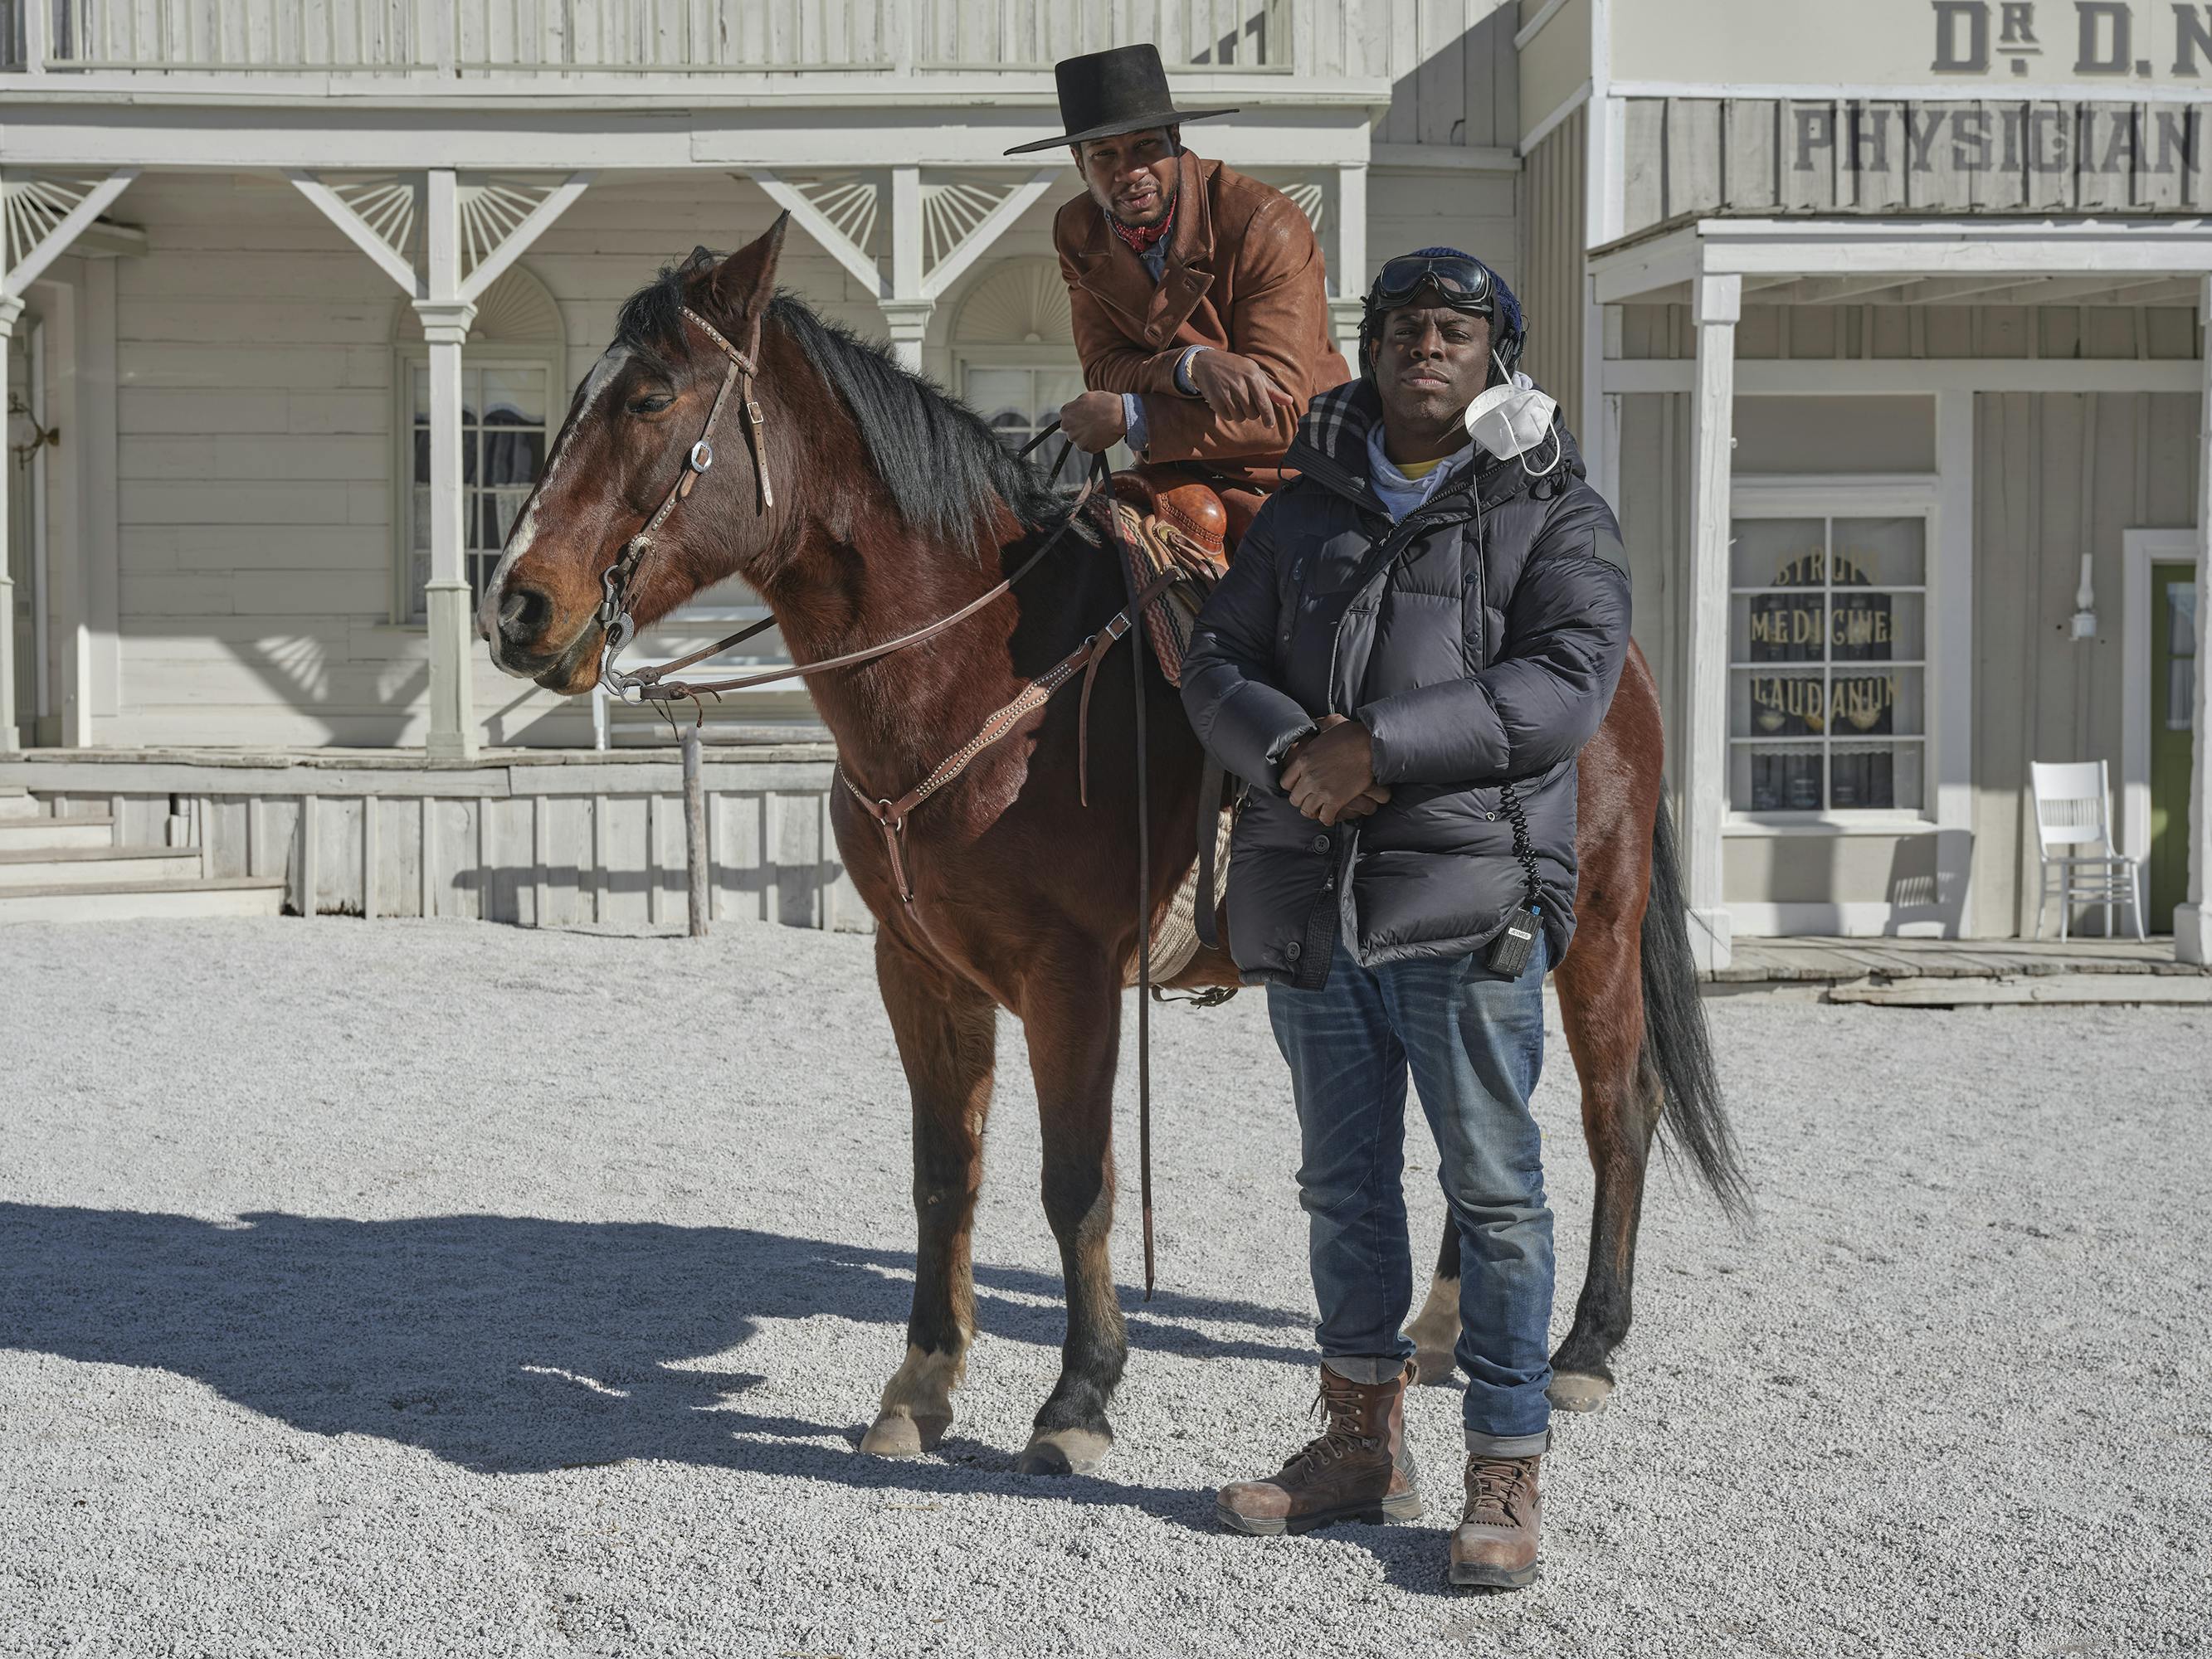 Jonathan Majors rides a brown horse and Jeymes Samuel stands next to him in a puffer jacket, jeans, and a black helmet. Behind them is the white town, complete with white sand and a white wraparound porch.